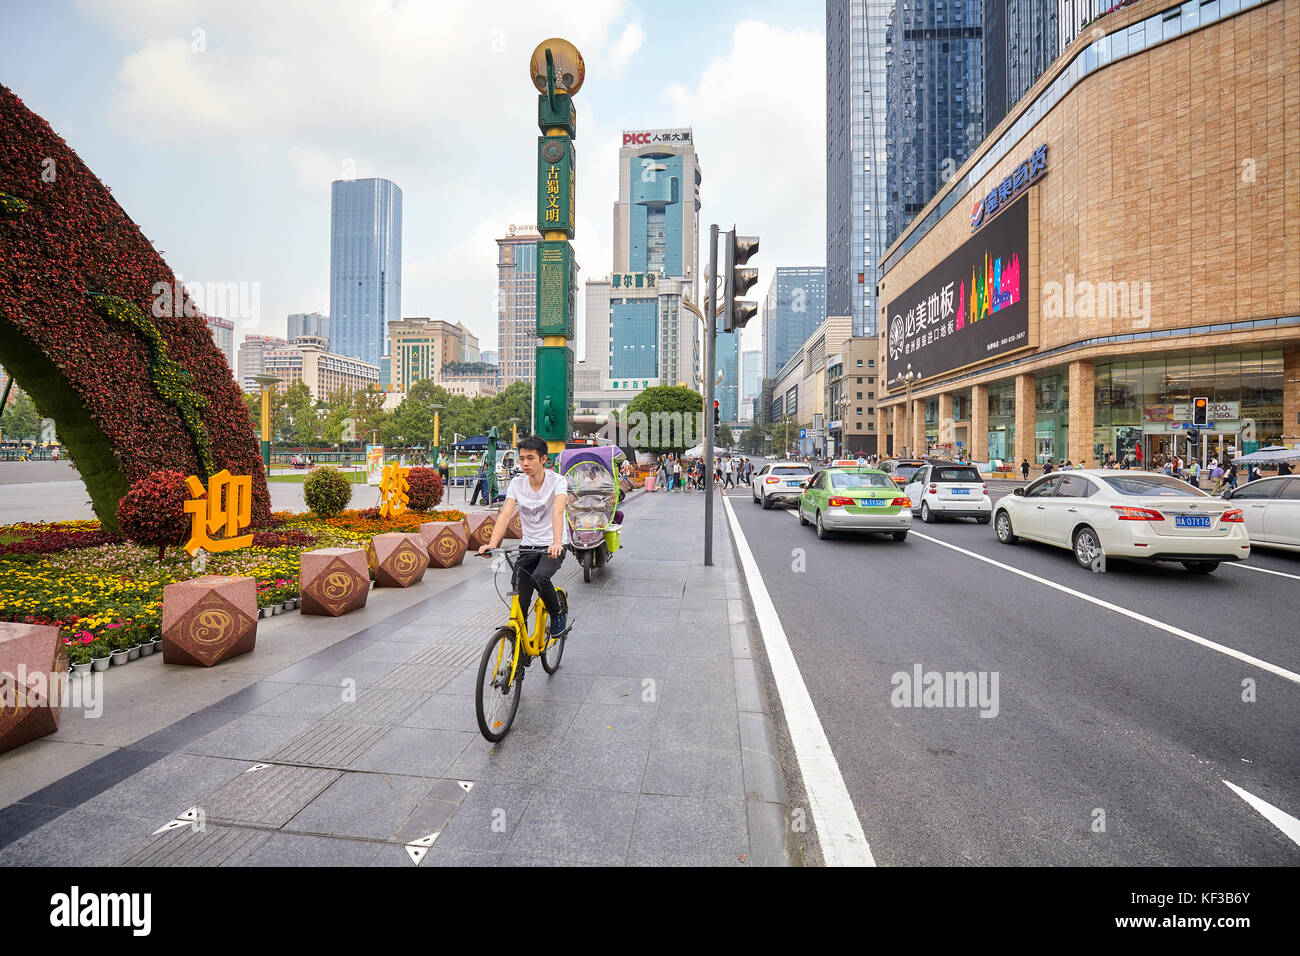 Chengdu, China - September 29, 2017: Busy street in downtown Chengdu, one of the three most populous cities in Western China. Stock Photo